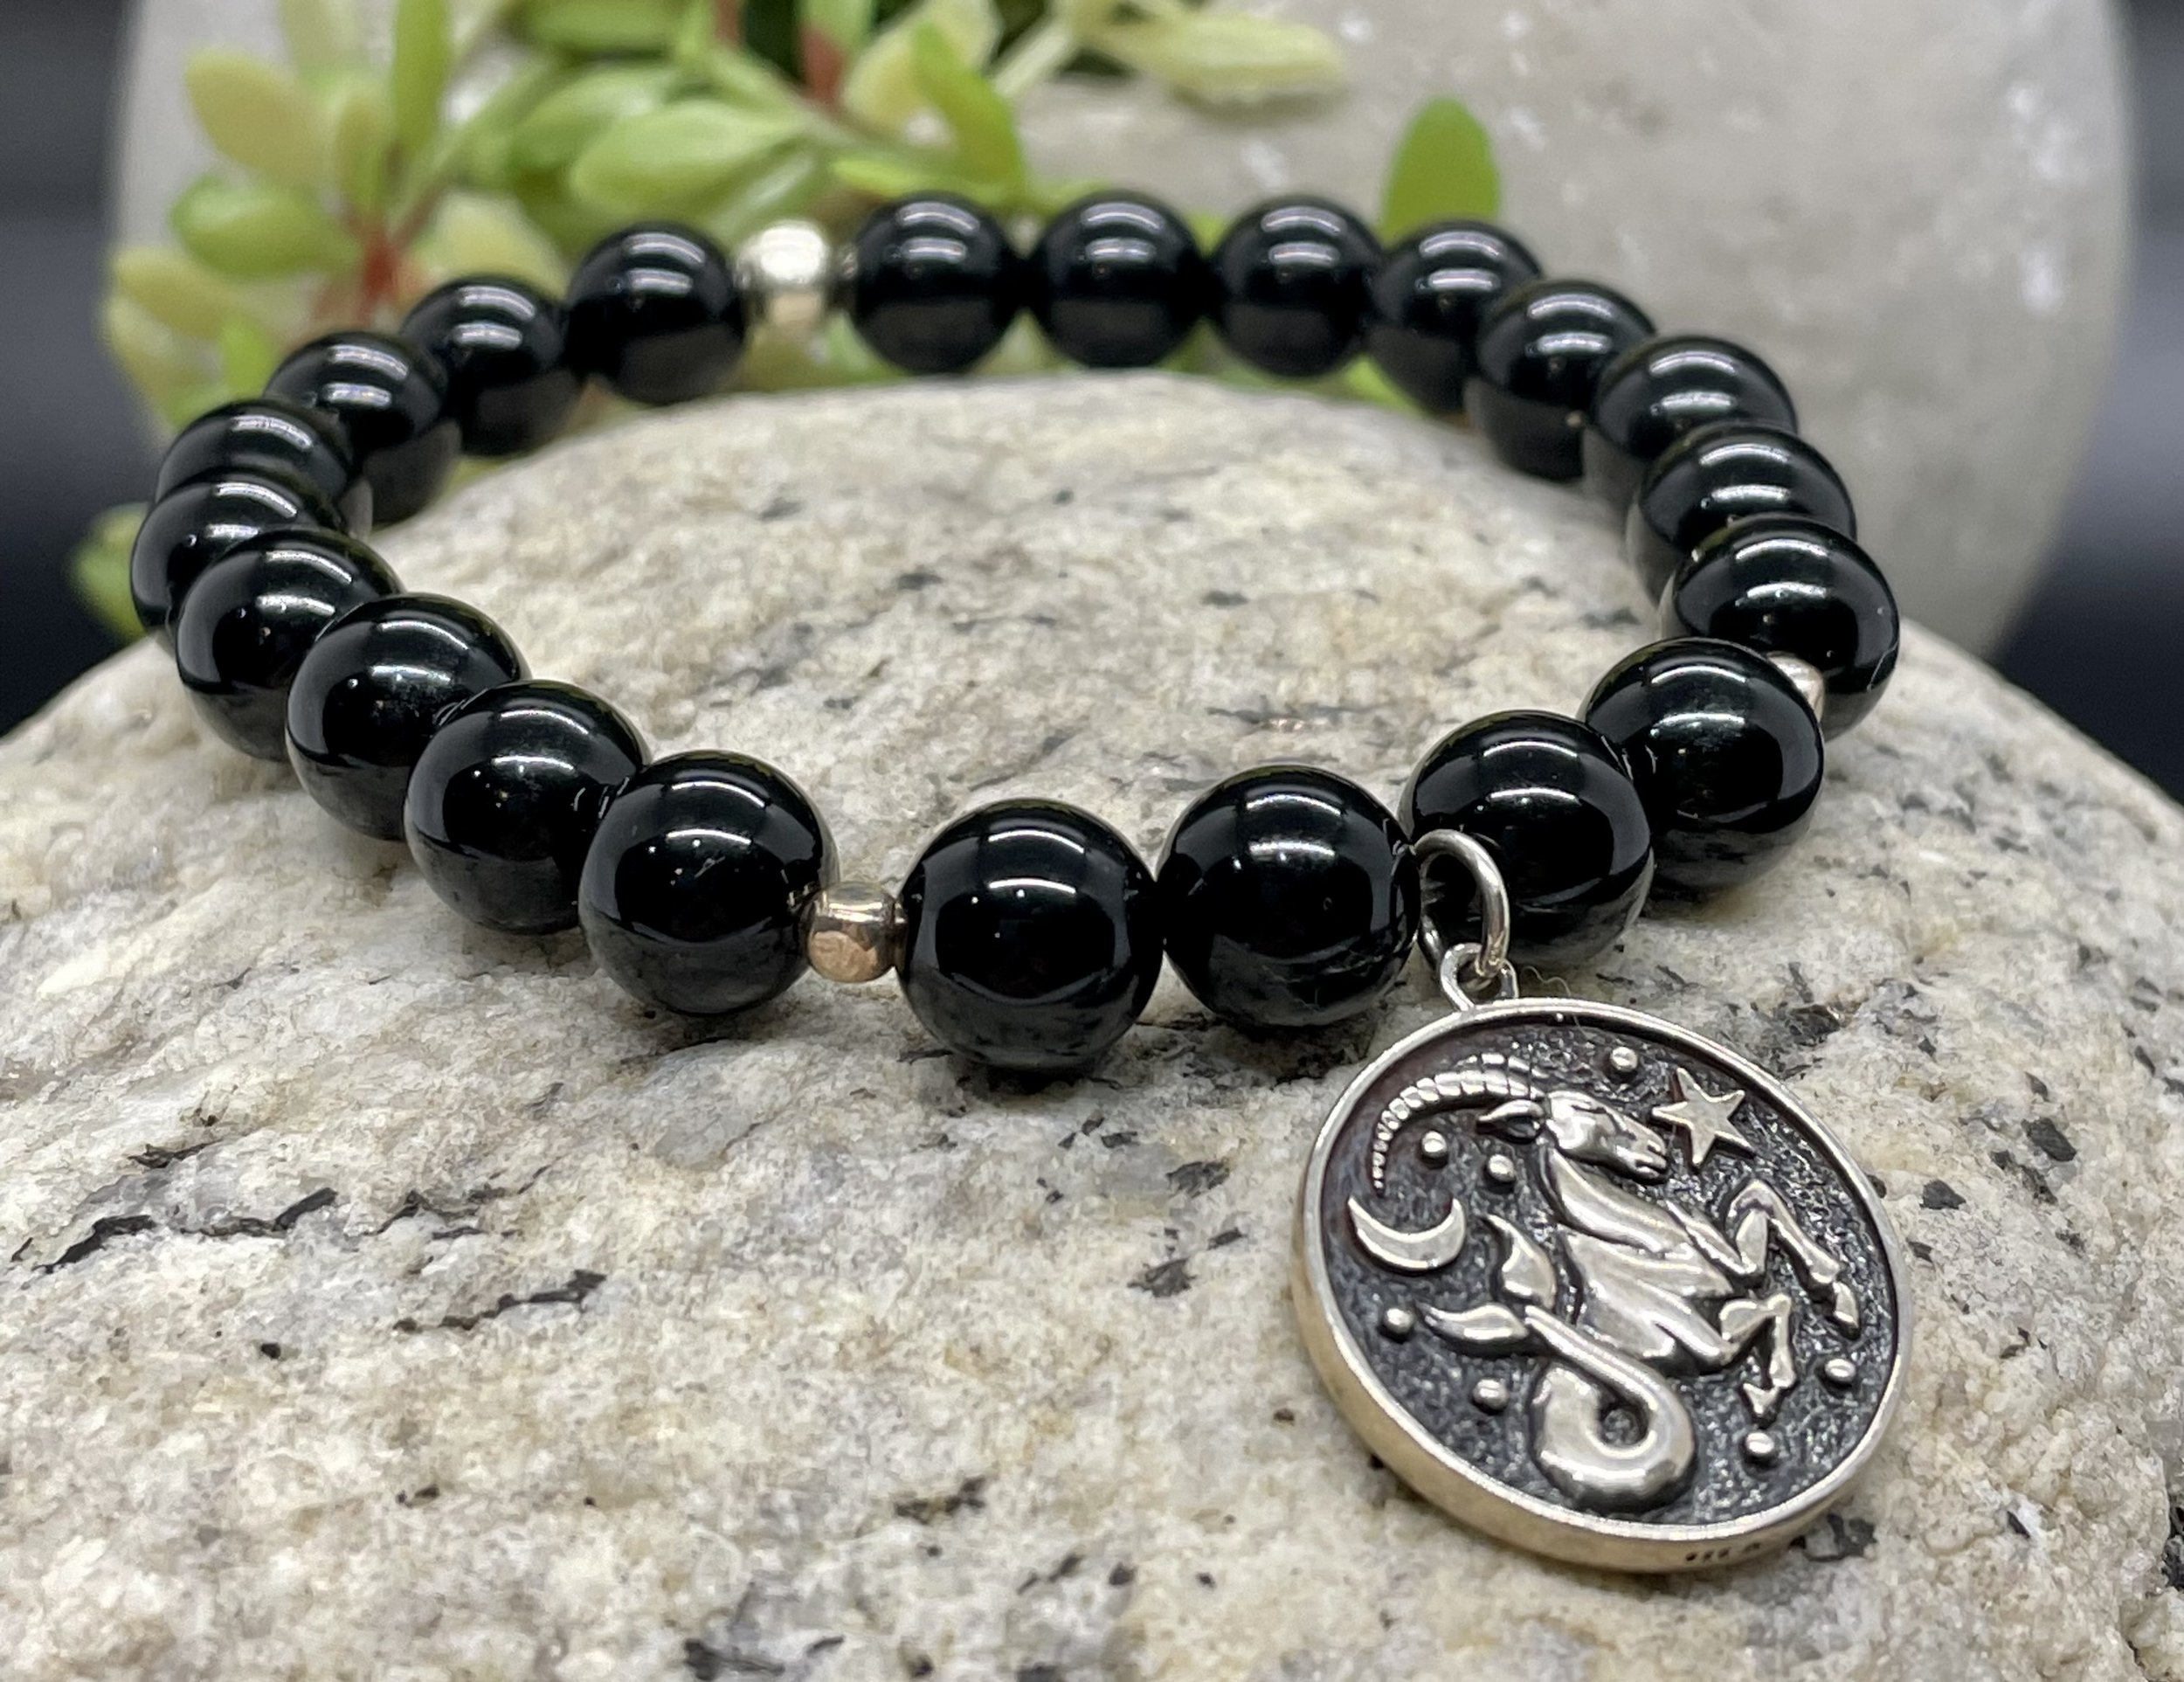 Capricorn Zodiac Bracelet and Astrology Jewelry, choice of crystal color